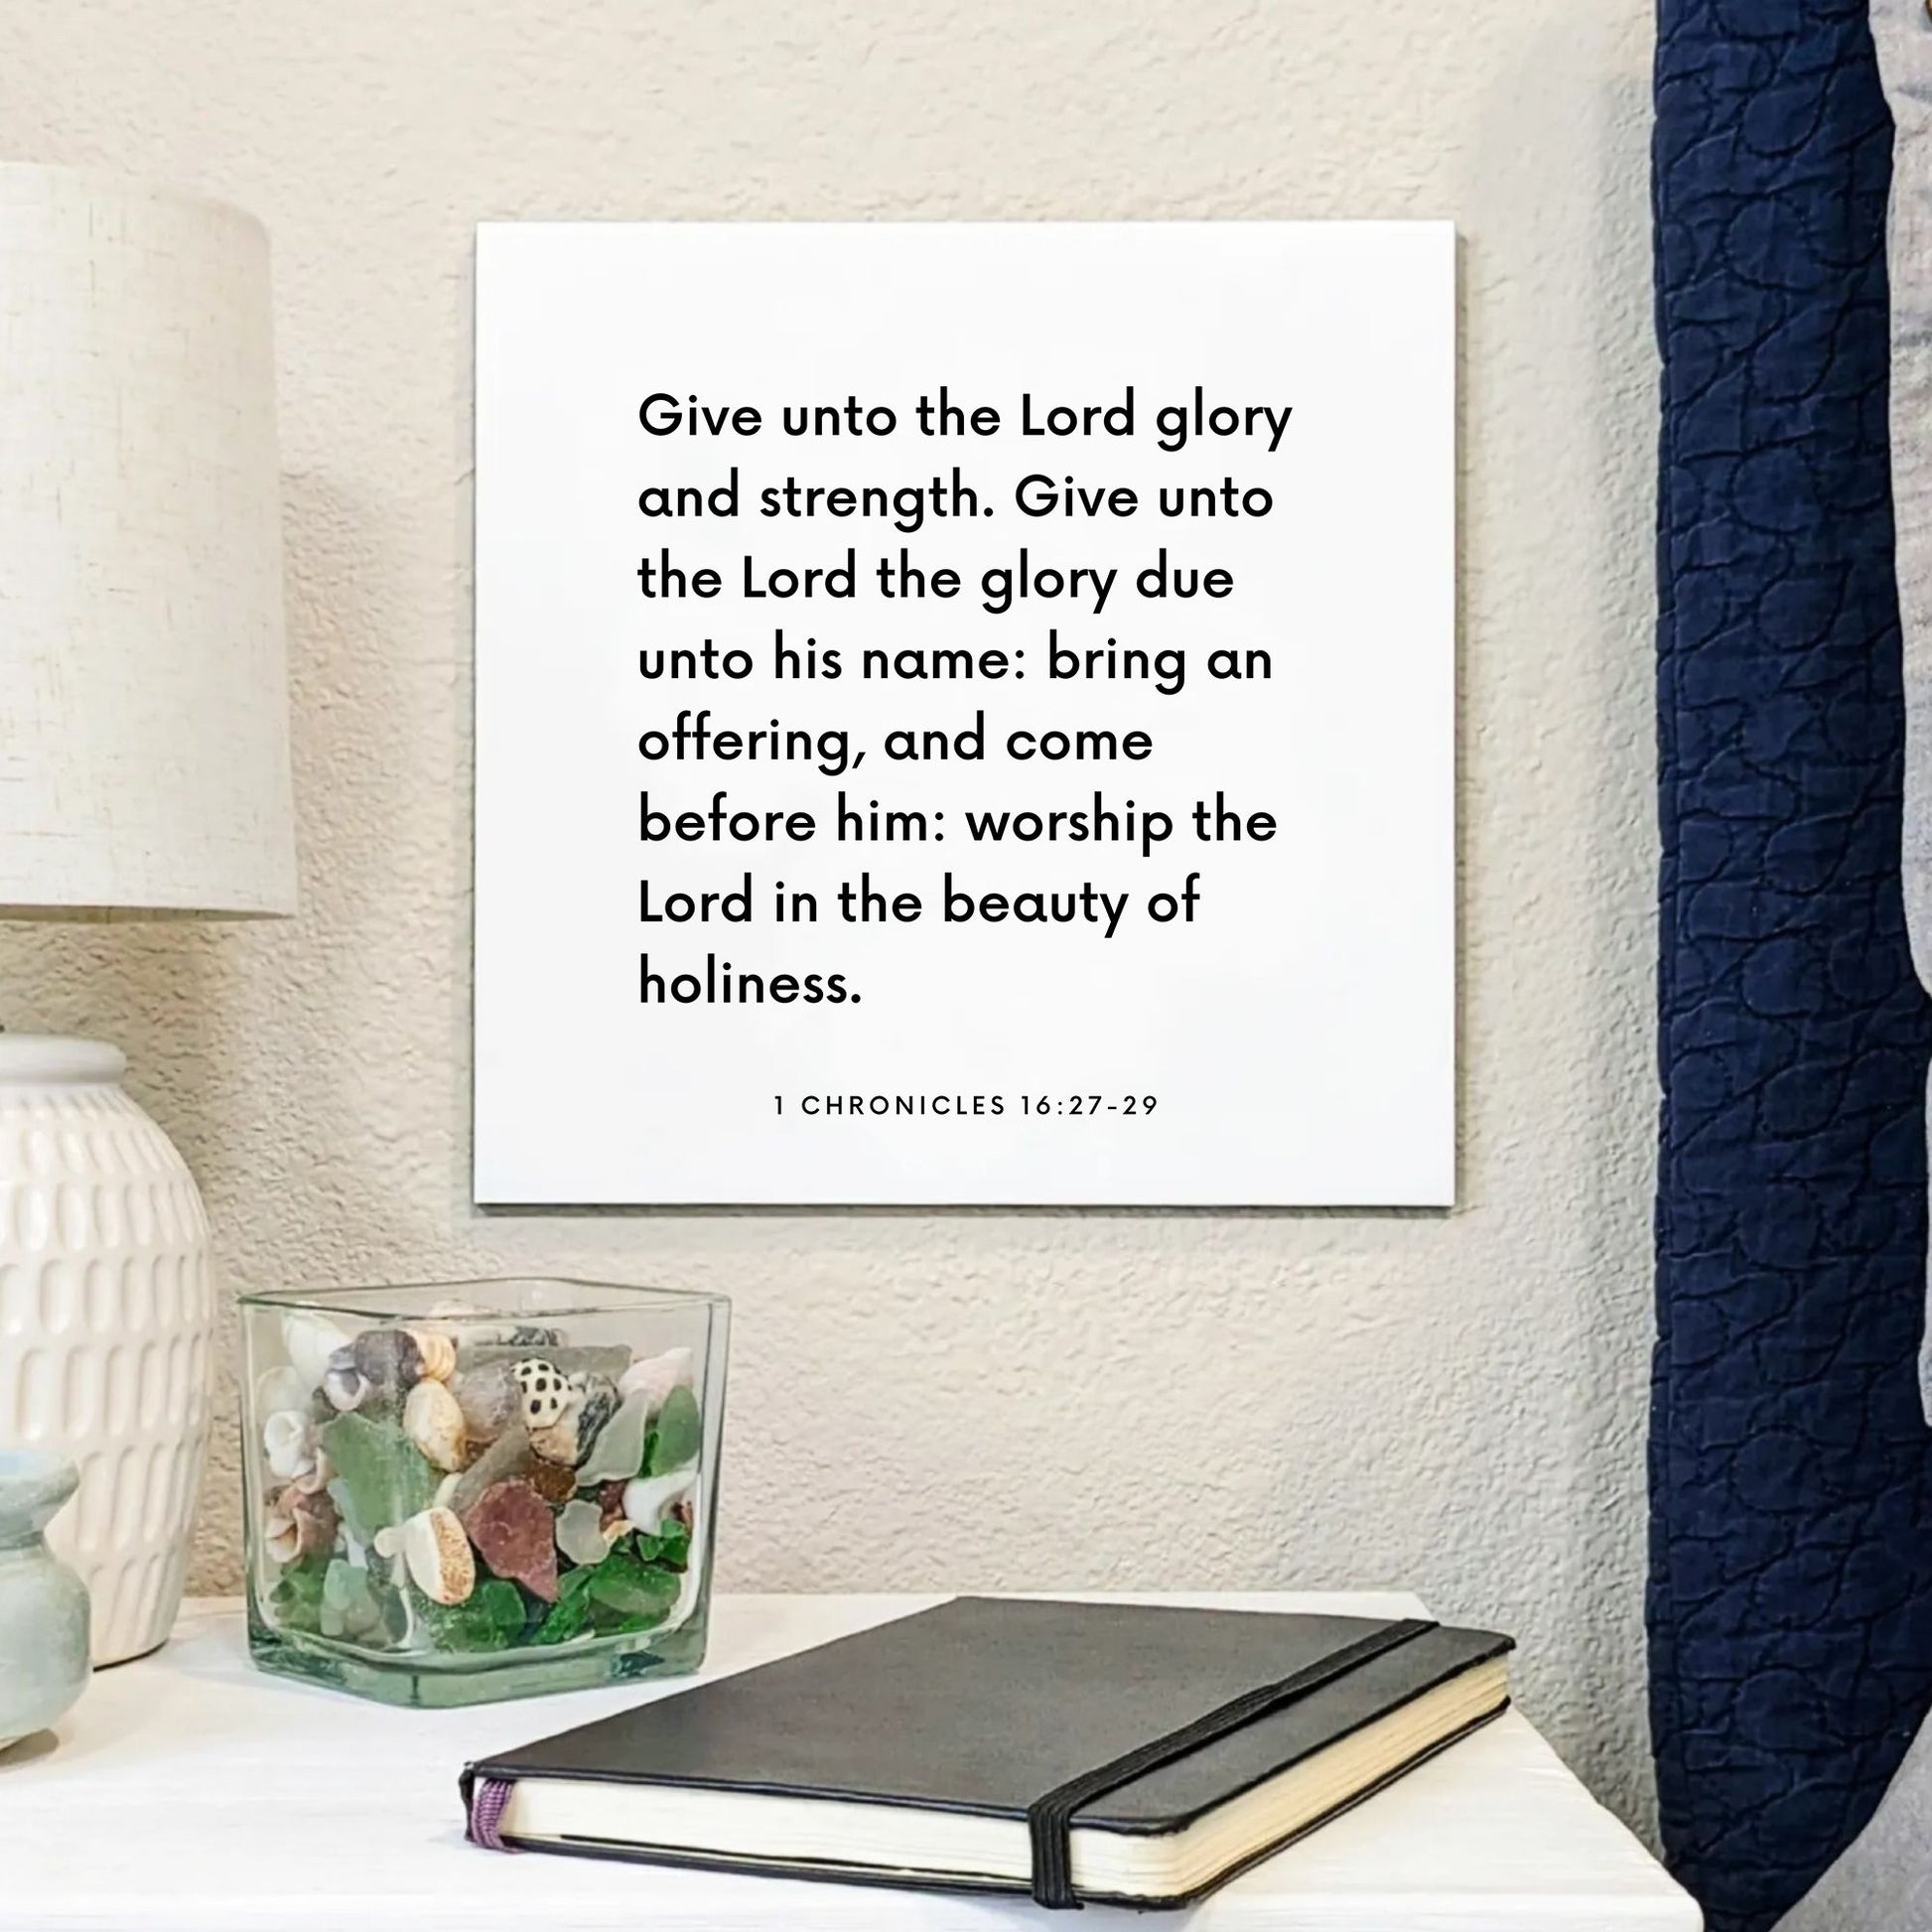 Bedside mouting of the scripture tile for 1 Chronicles 16:27-29 - "Give unto the Lord glory and strength"